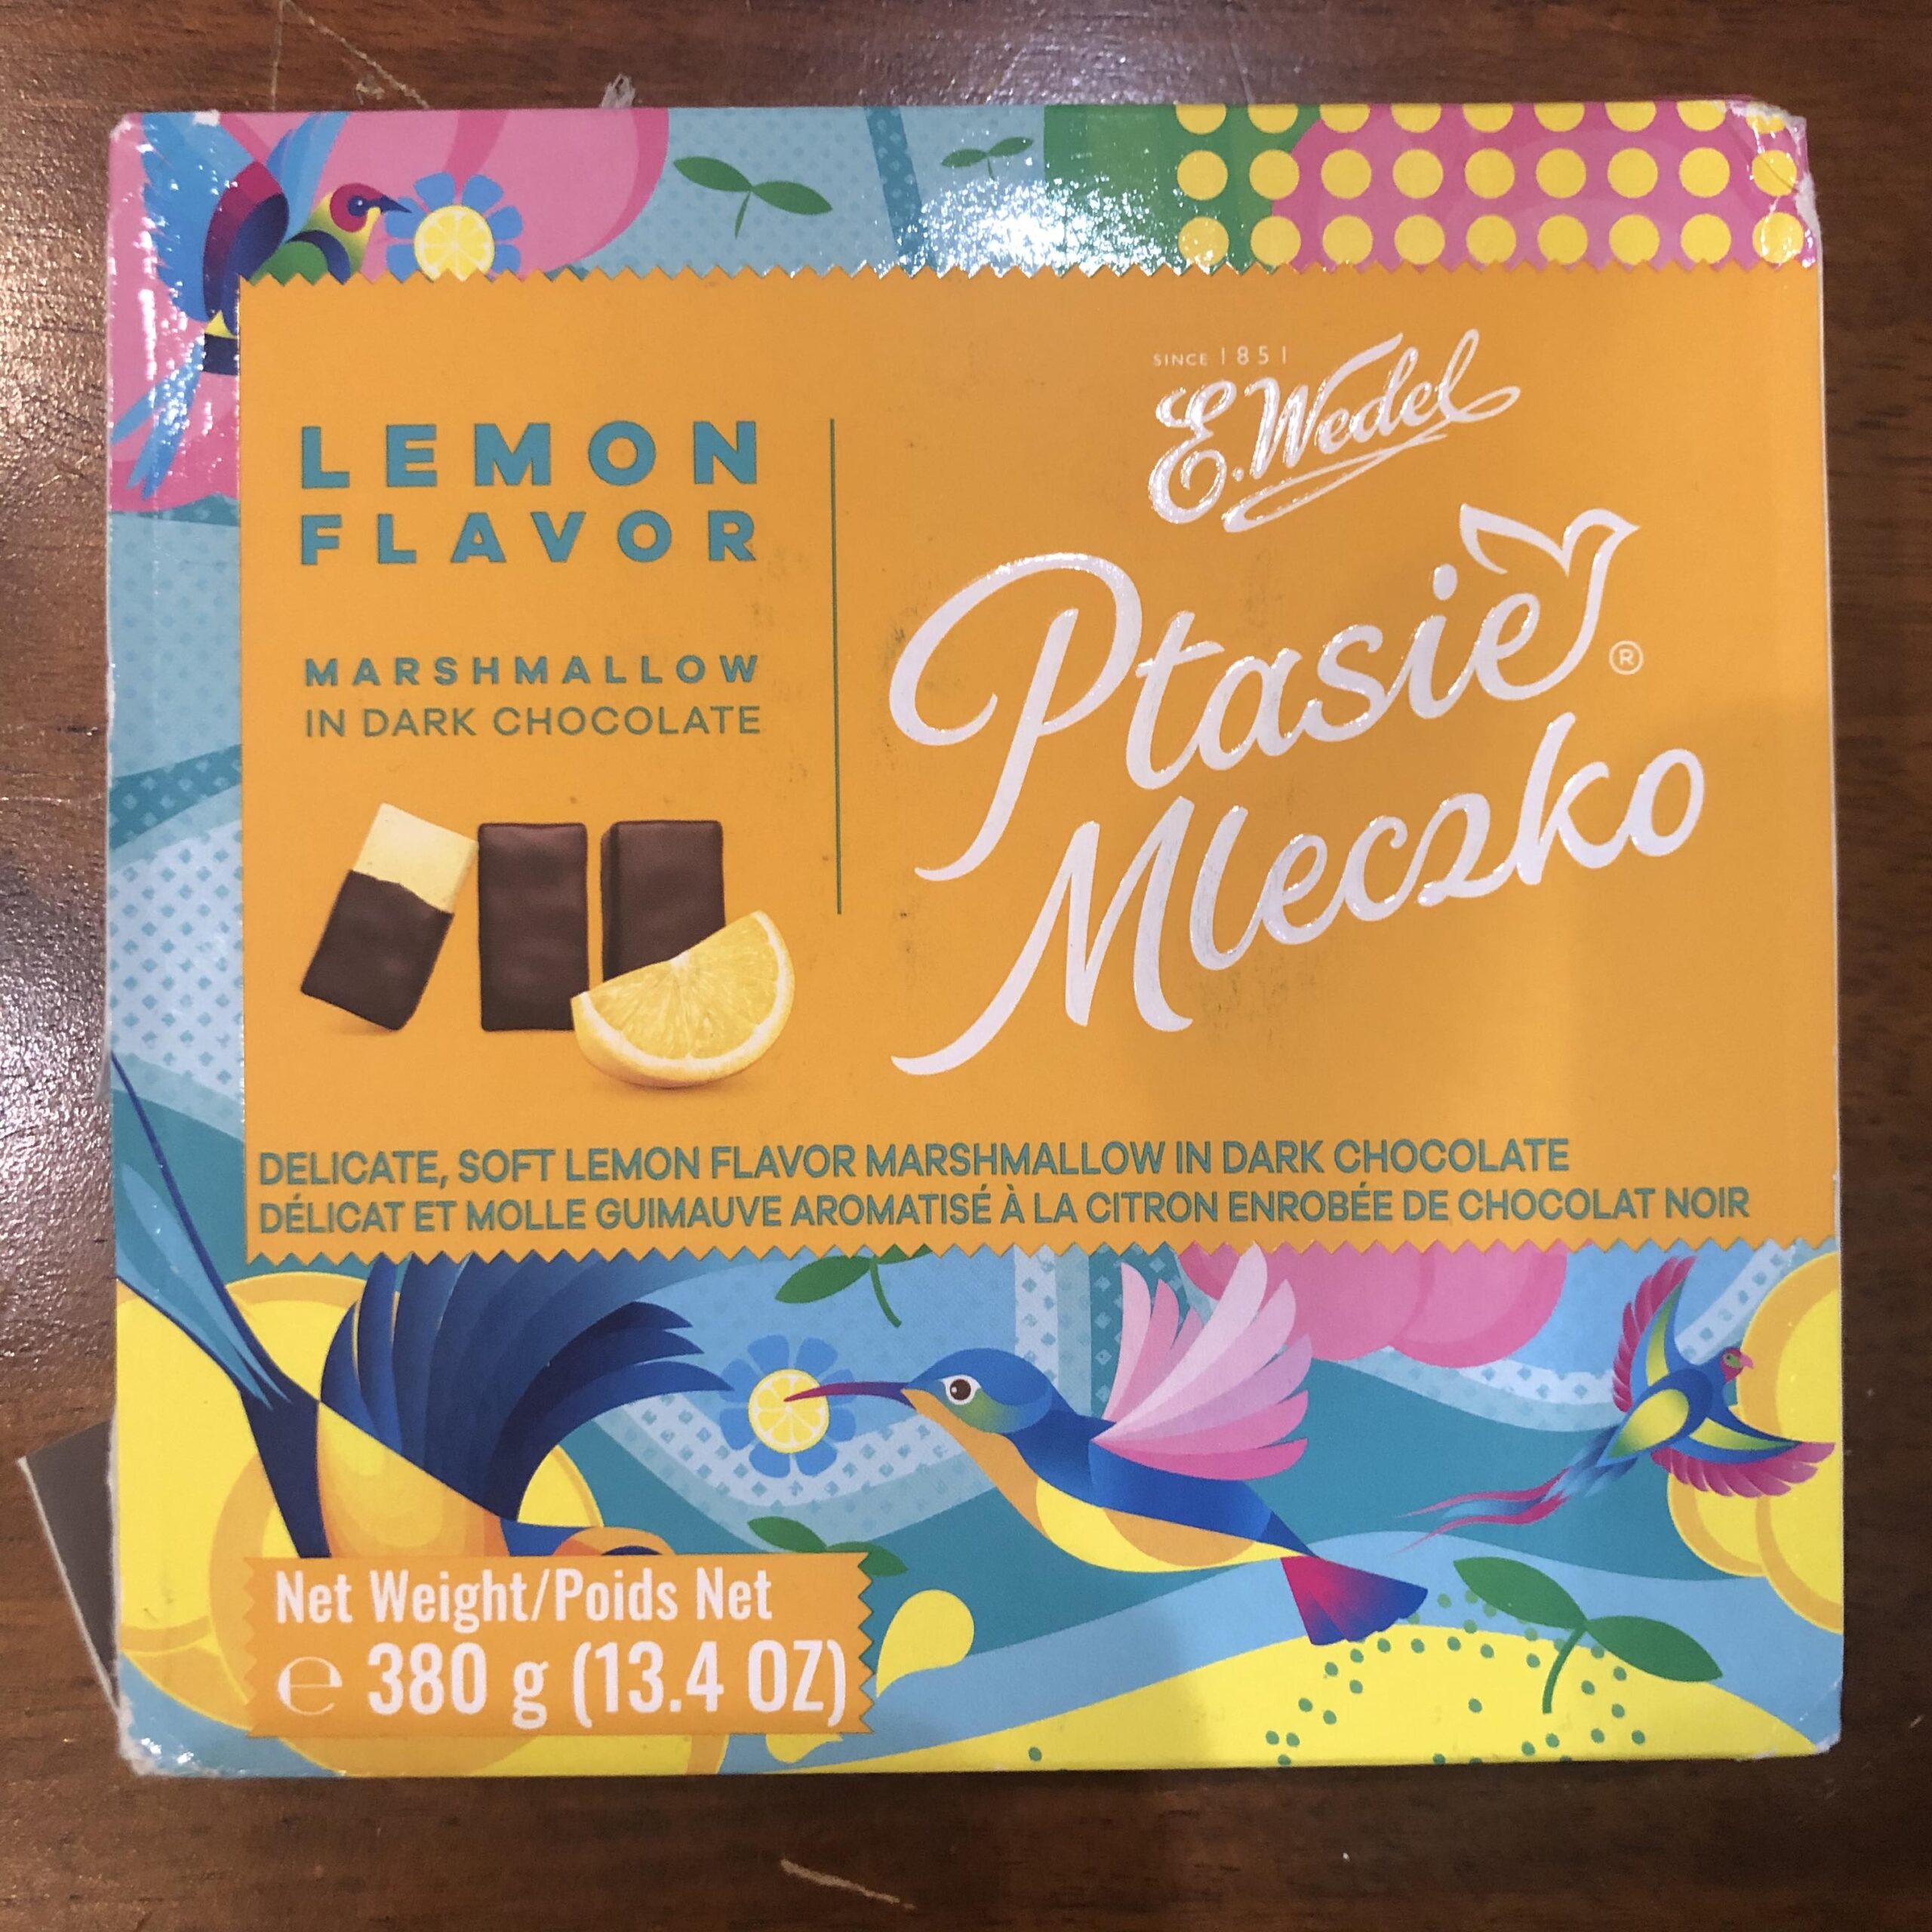 Lemon ptasie mleczko box of candy from Poland by E Wedel Company